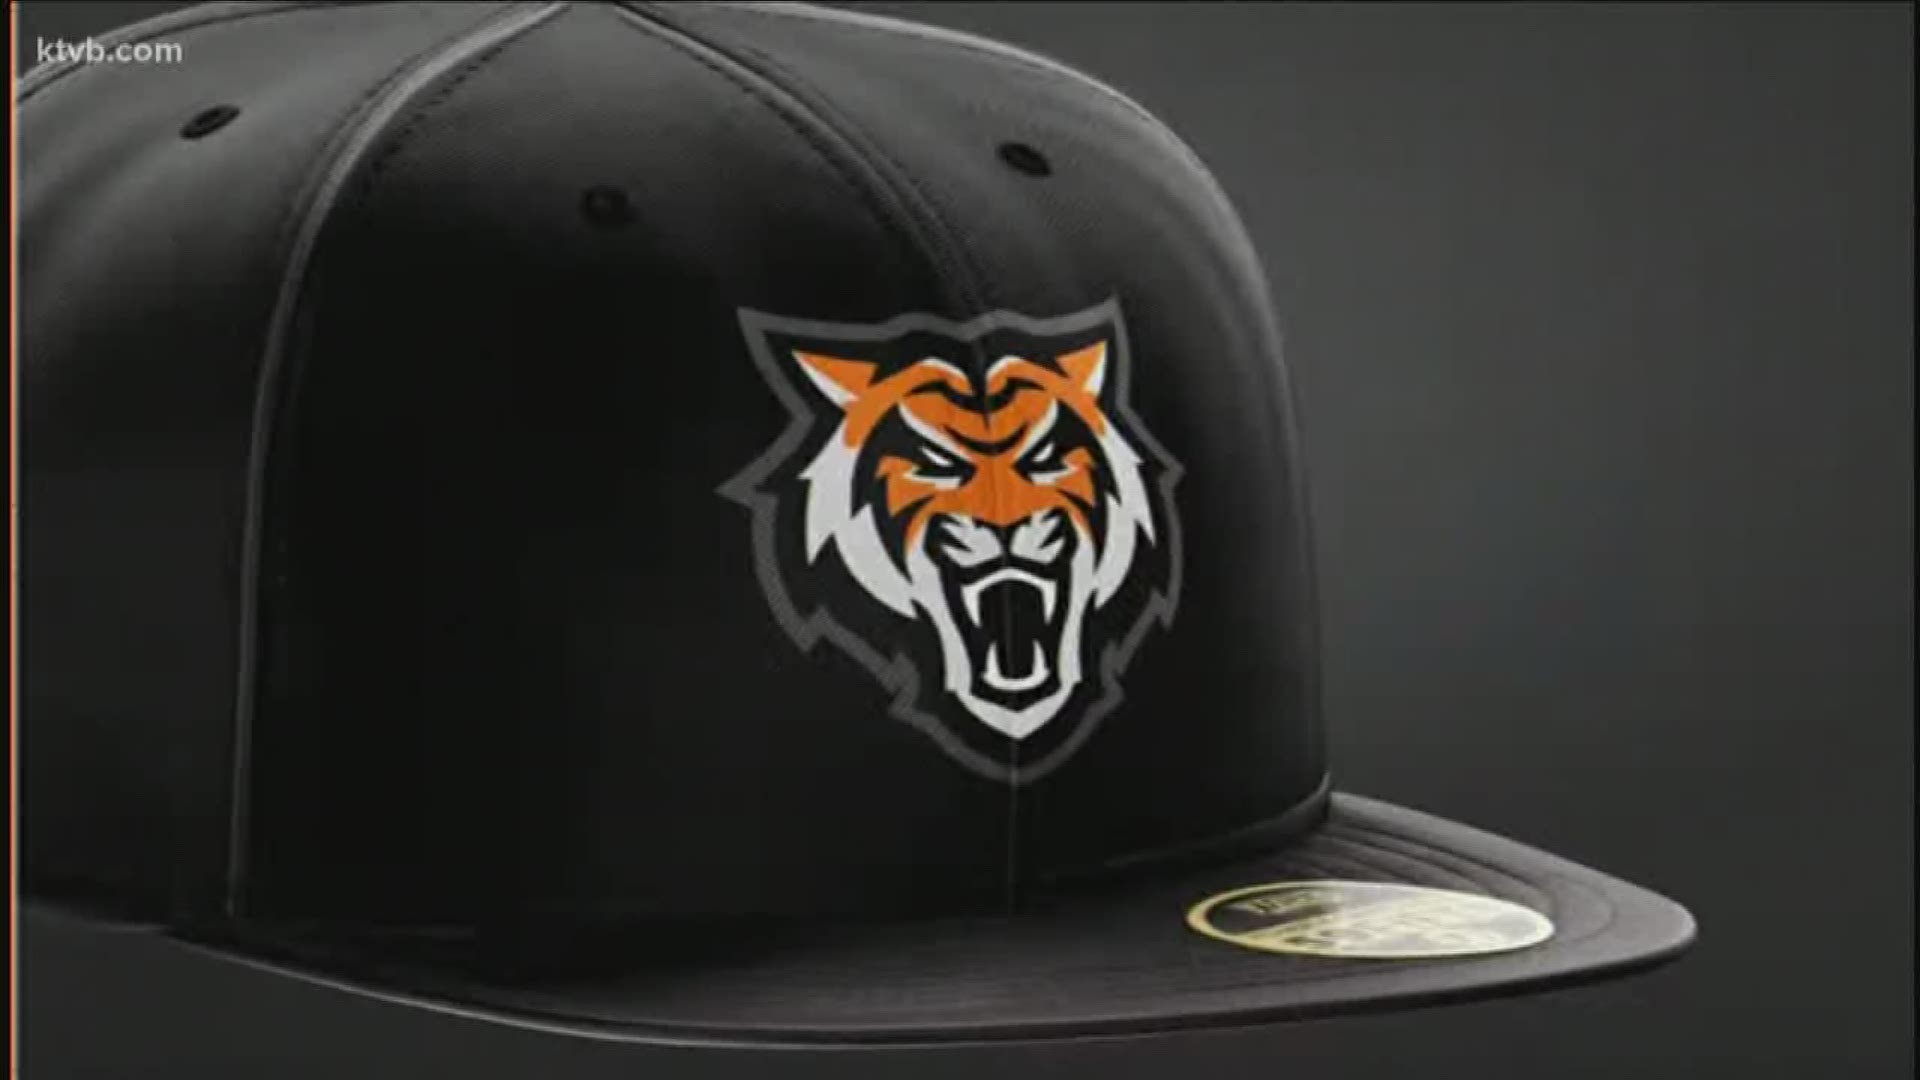 The new logo includes a new Bengal head.